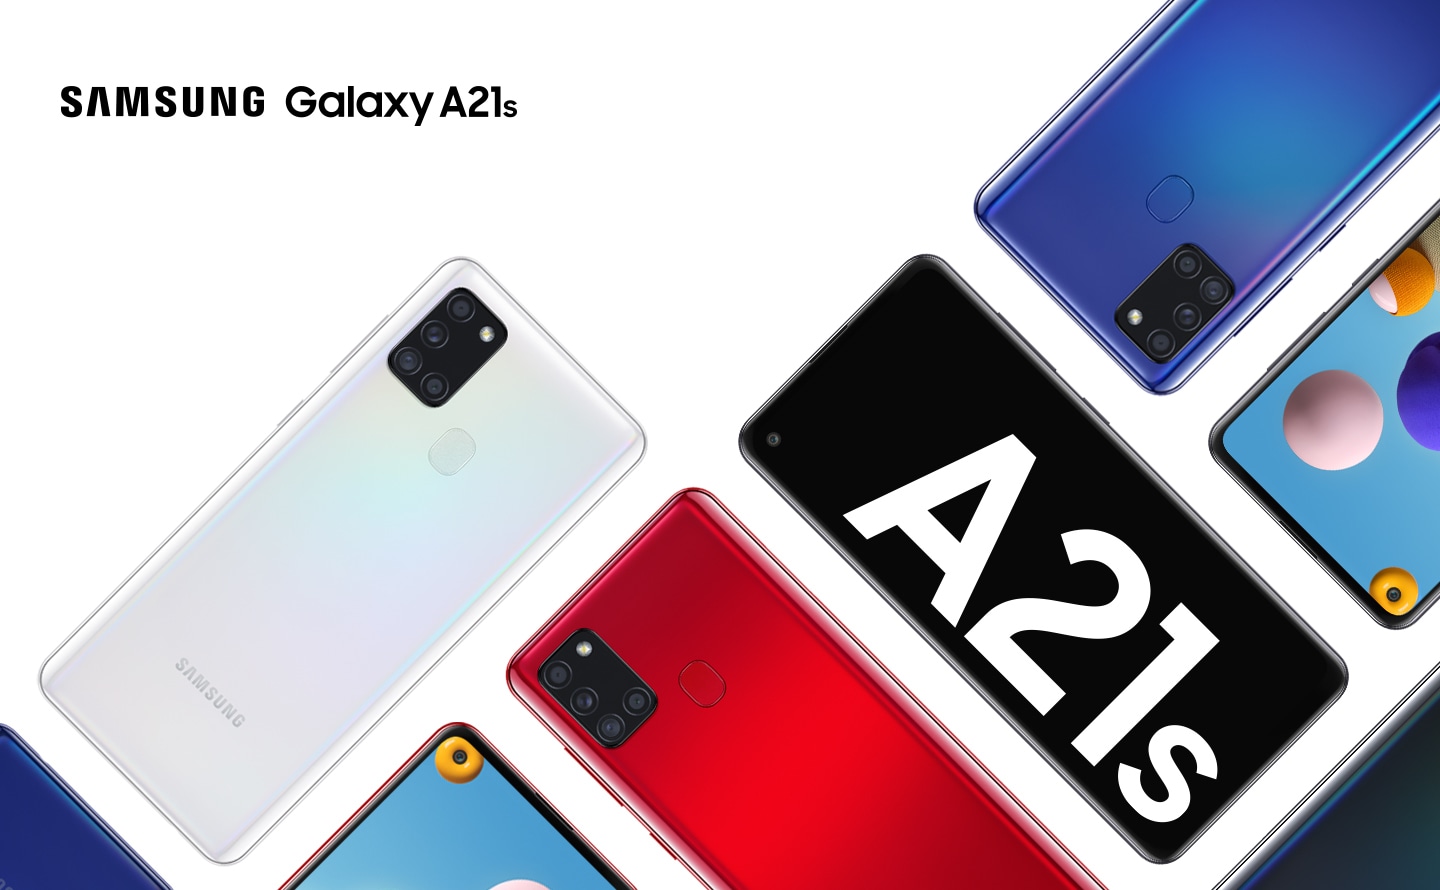 Samsung Galaxy A21s price and specifications